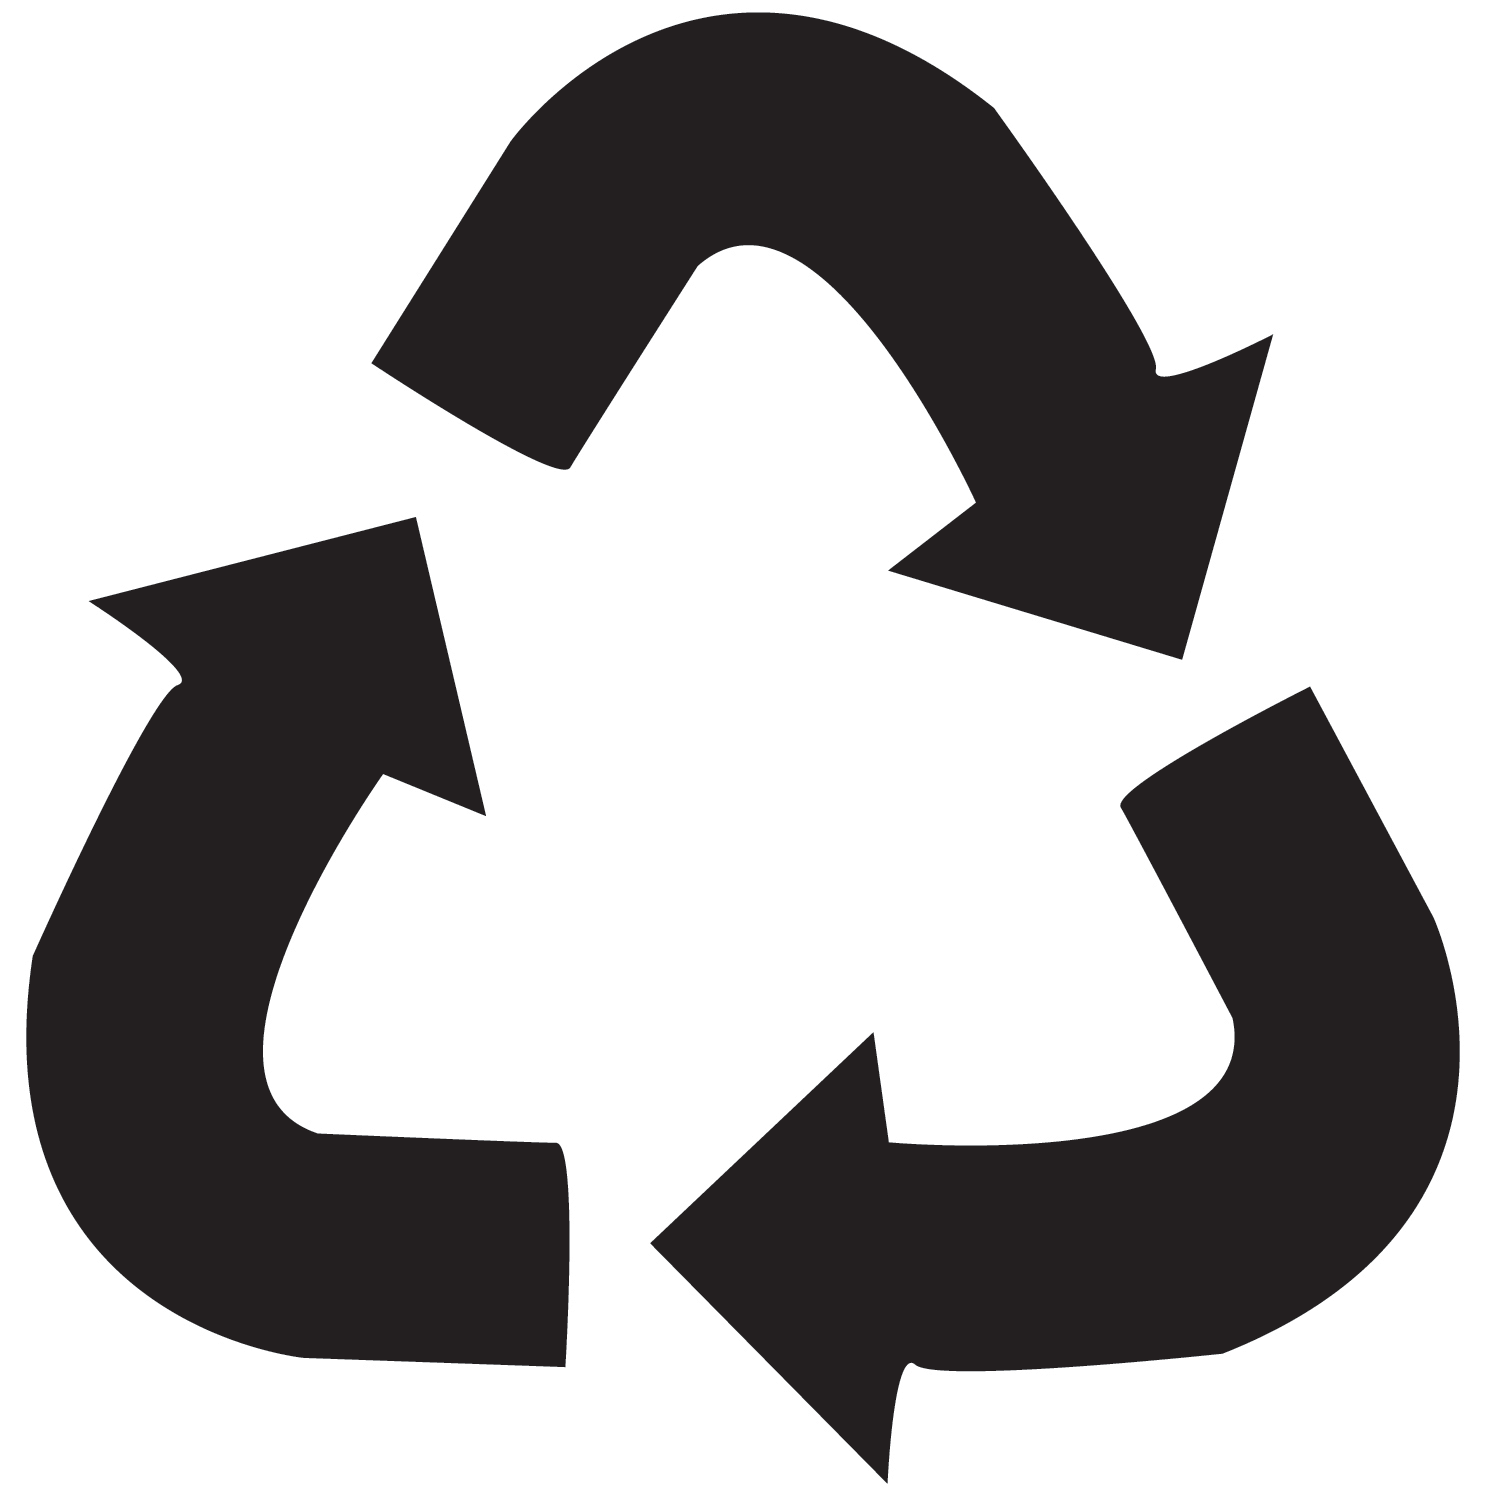 10 Different Styles of Recycling Symbol, Free to Download ...